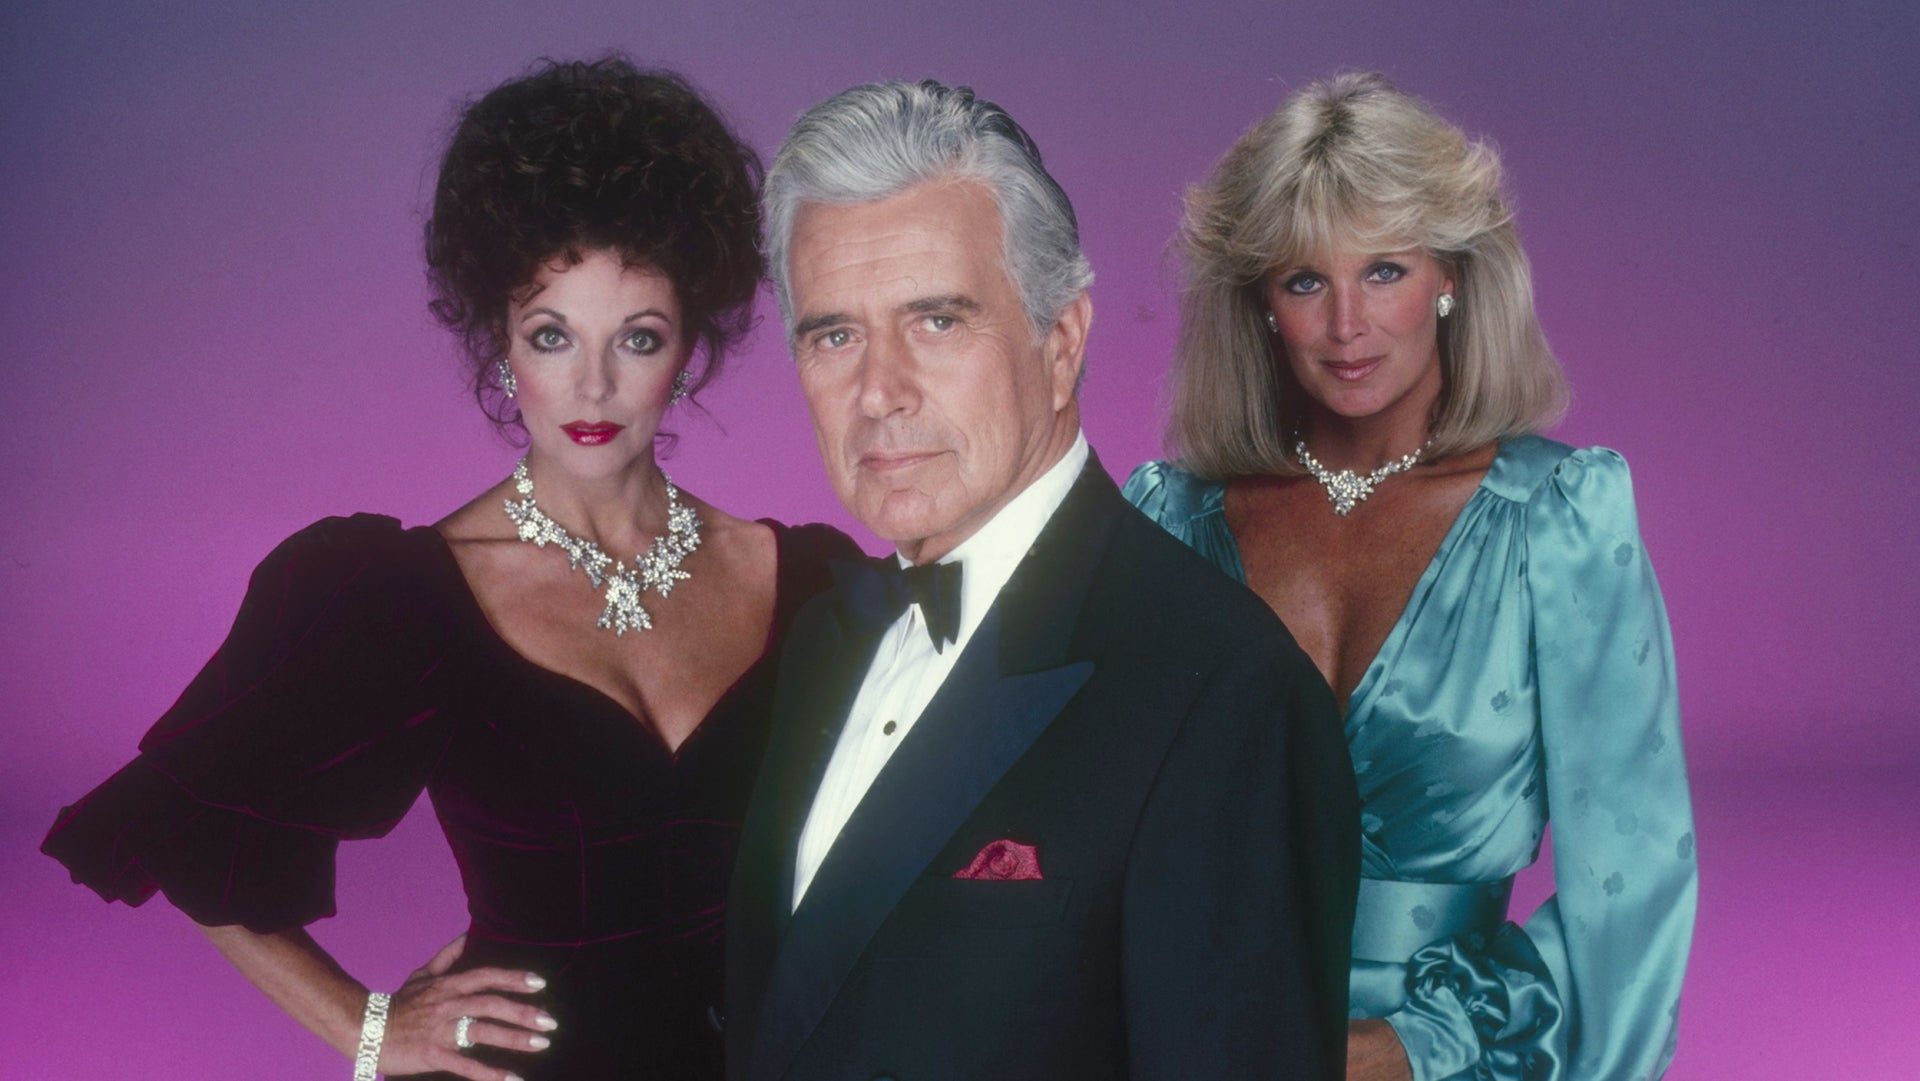 Dynasty: The Complete Series - Seasons 1-9